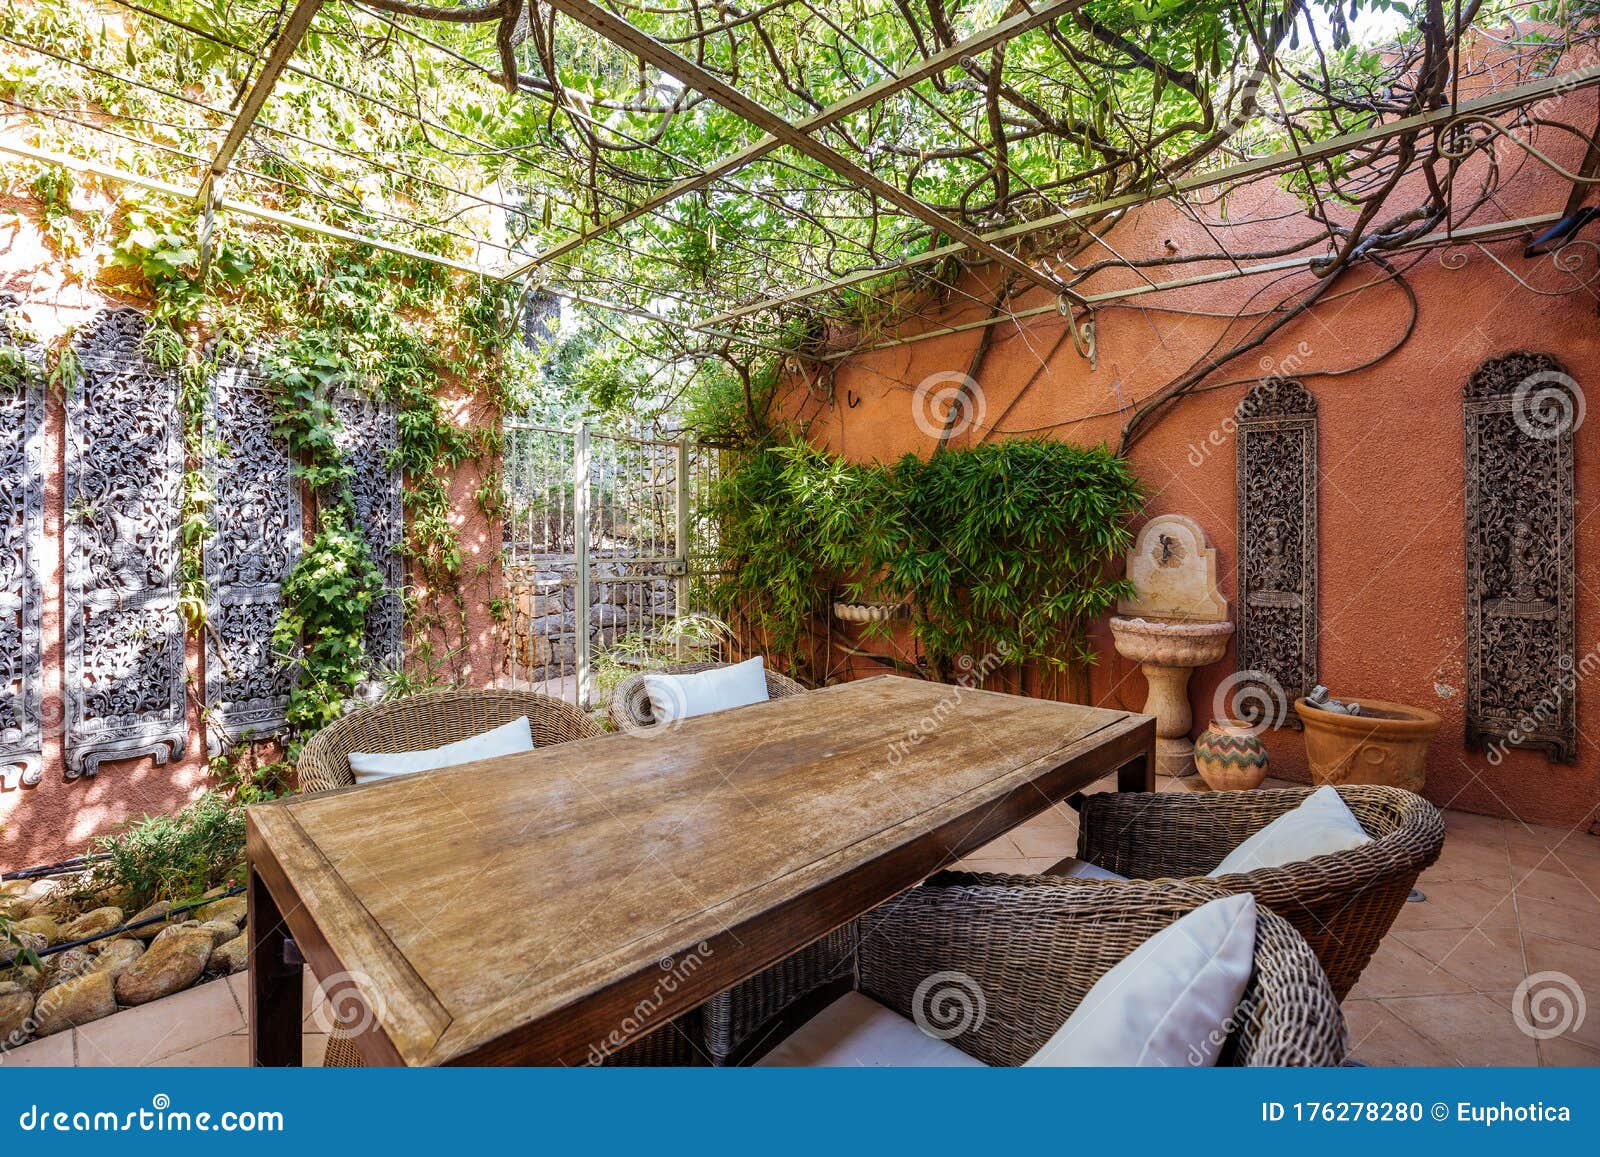 real estate photography villa, terrasse with table, chairs and plants